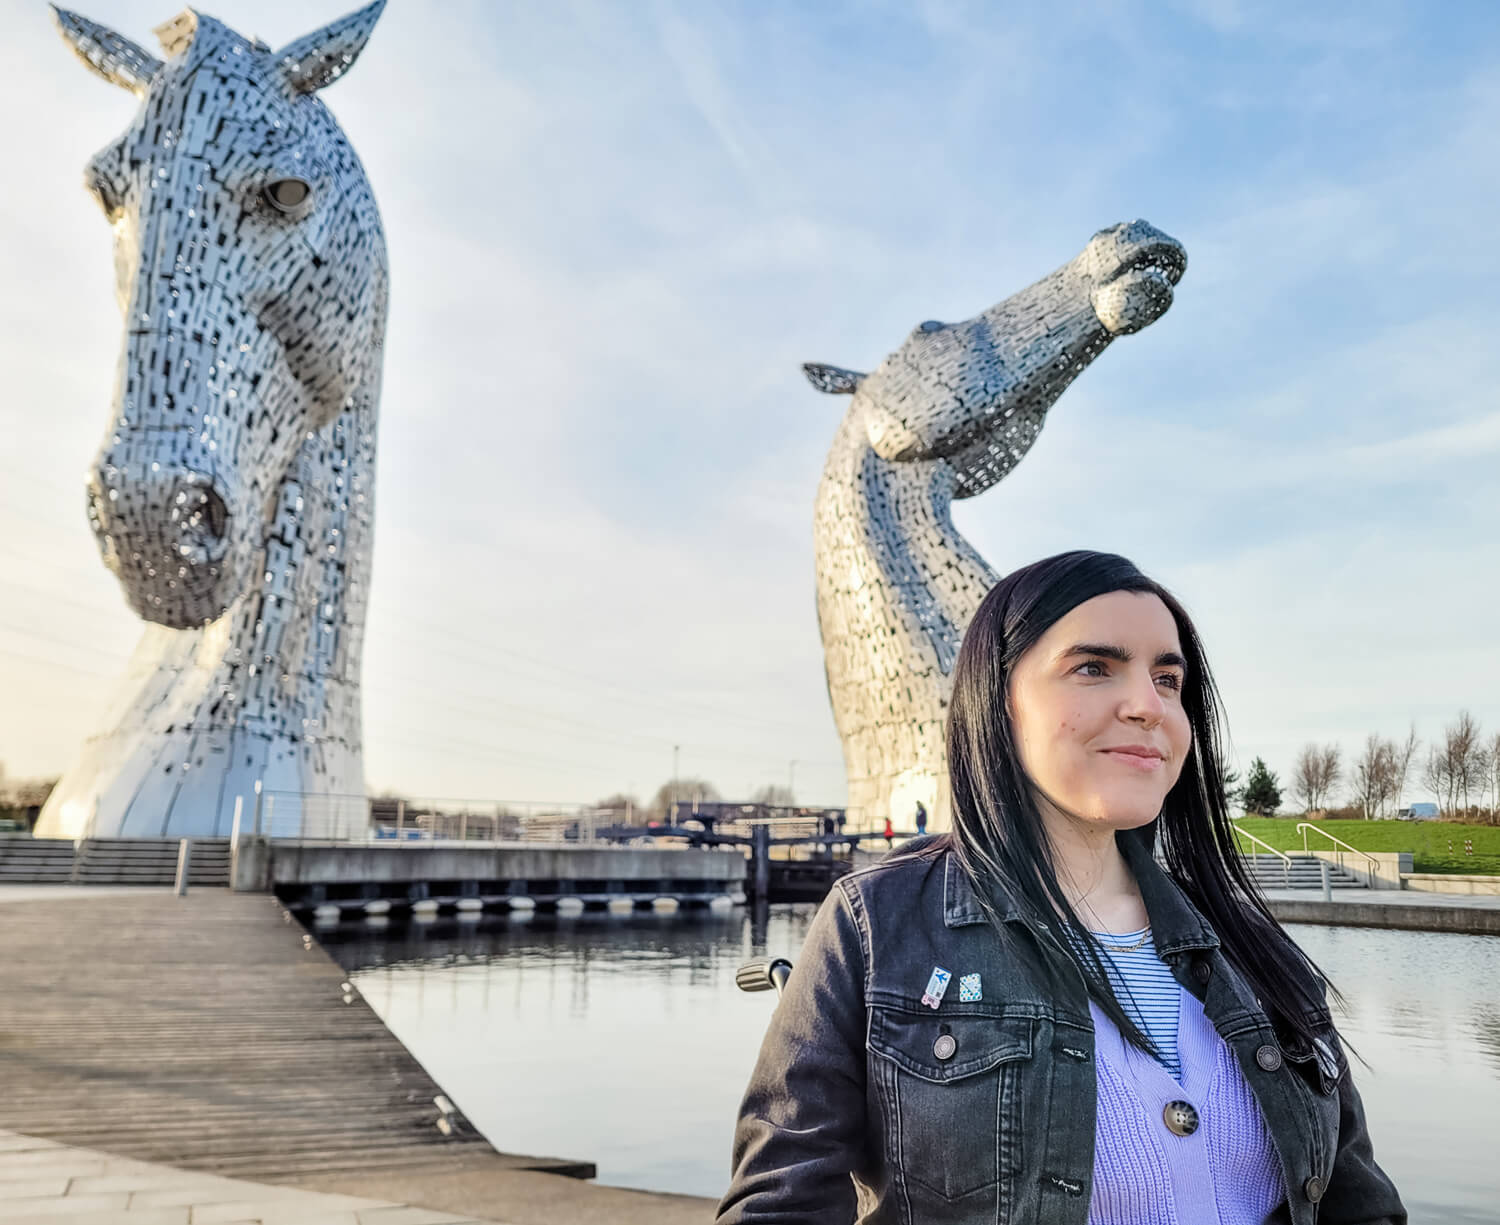 A shot of Emma from the waist up with the giant Kelpies behind her. Emma is smiling and looking off to the side of the camera. It is a sunny day and the Kelpies are shining.